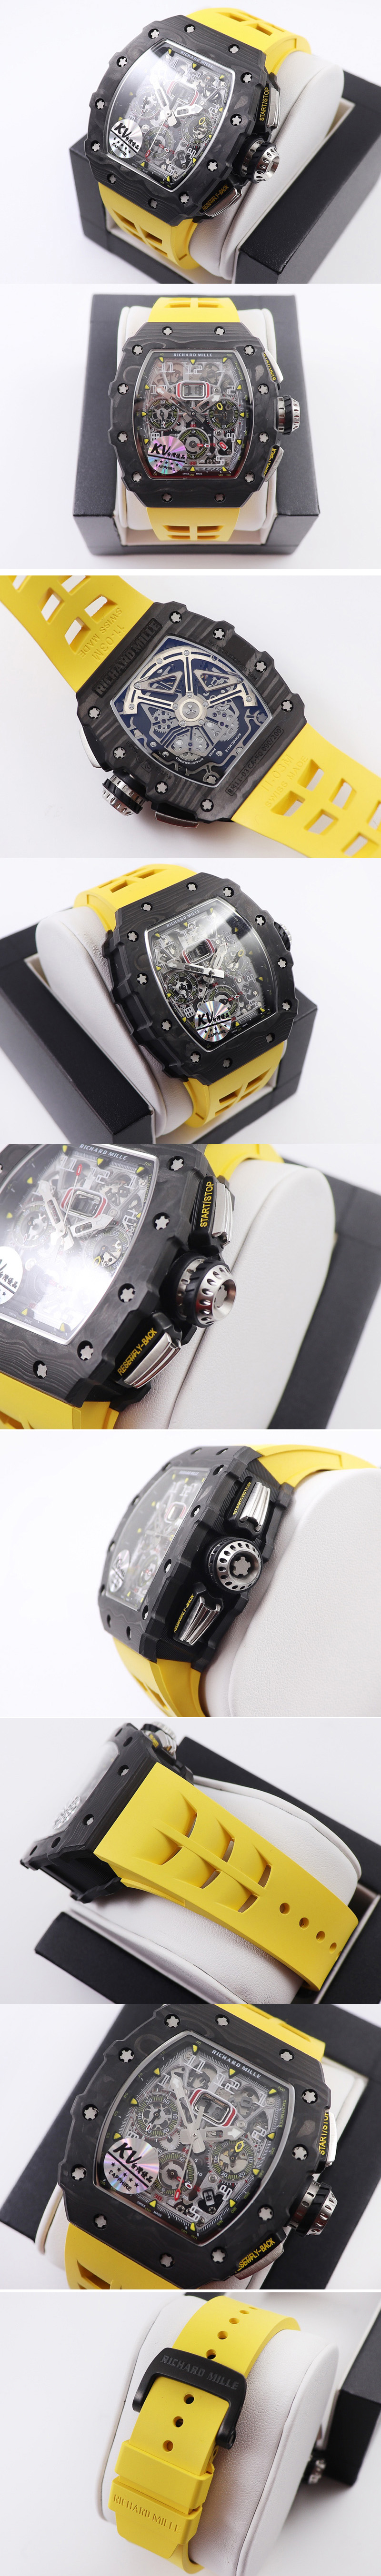 Replica Richard Mille  RM011 NTPT Chrono KVF 1:1 Best Edition Crystal Dial on Yellow Rubber Strap A7750